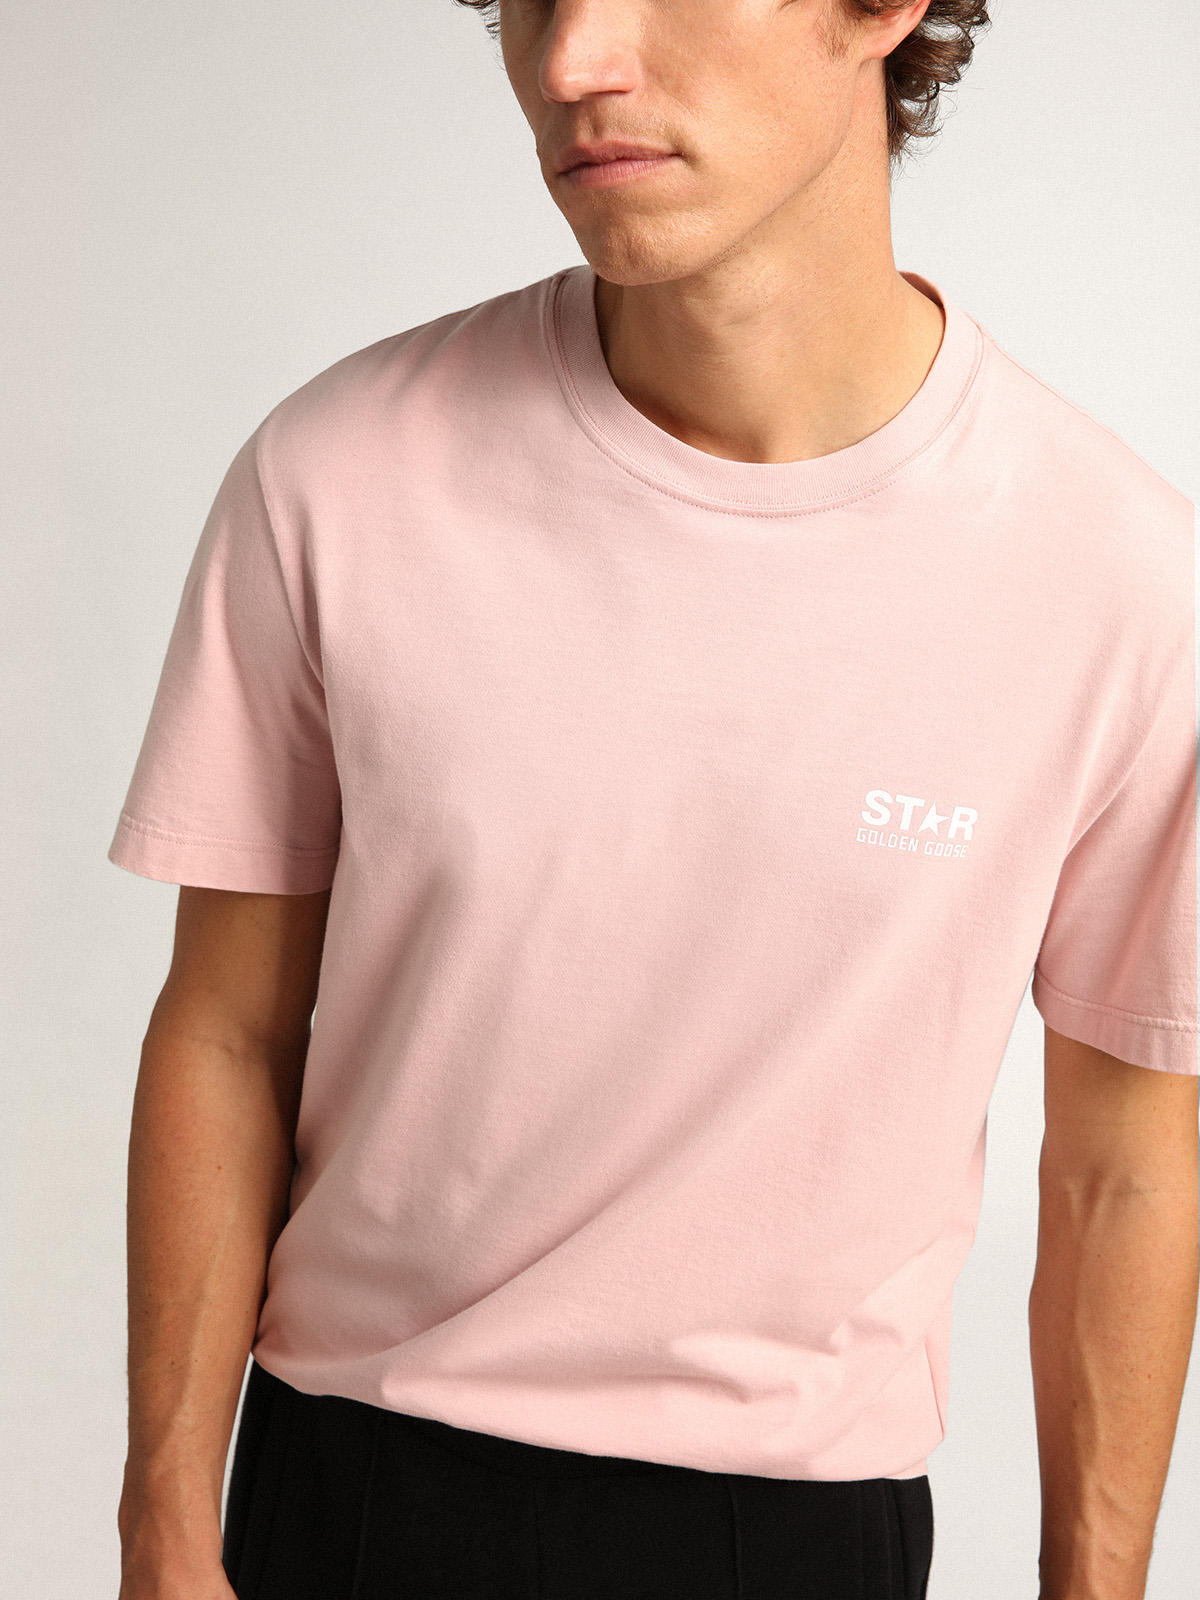 Lavender pink Star Collection T-shirt with white logo and star 